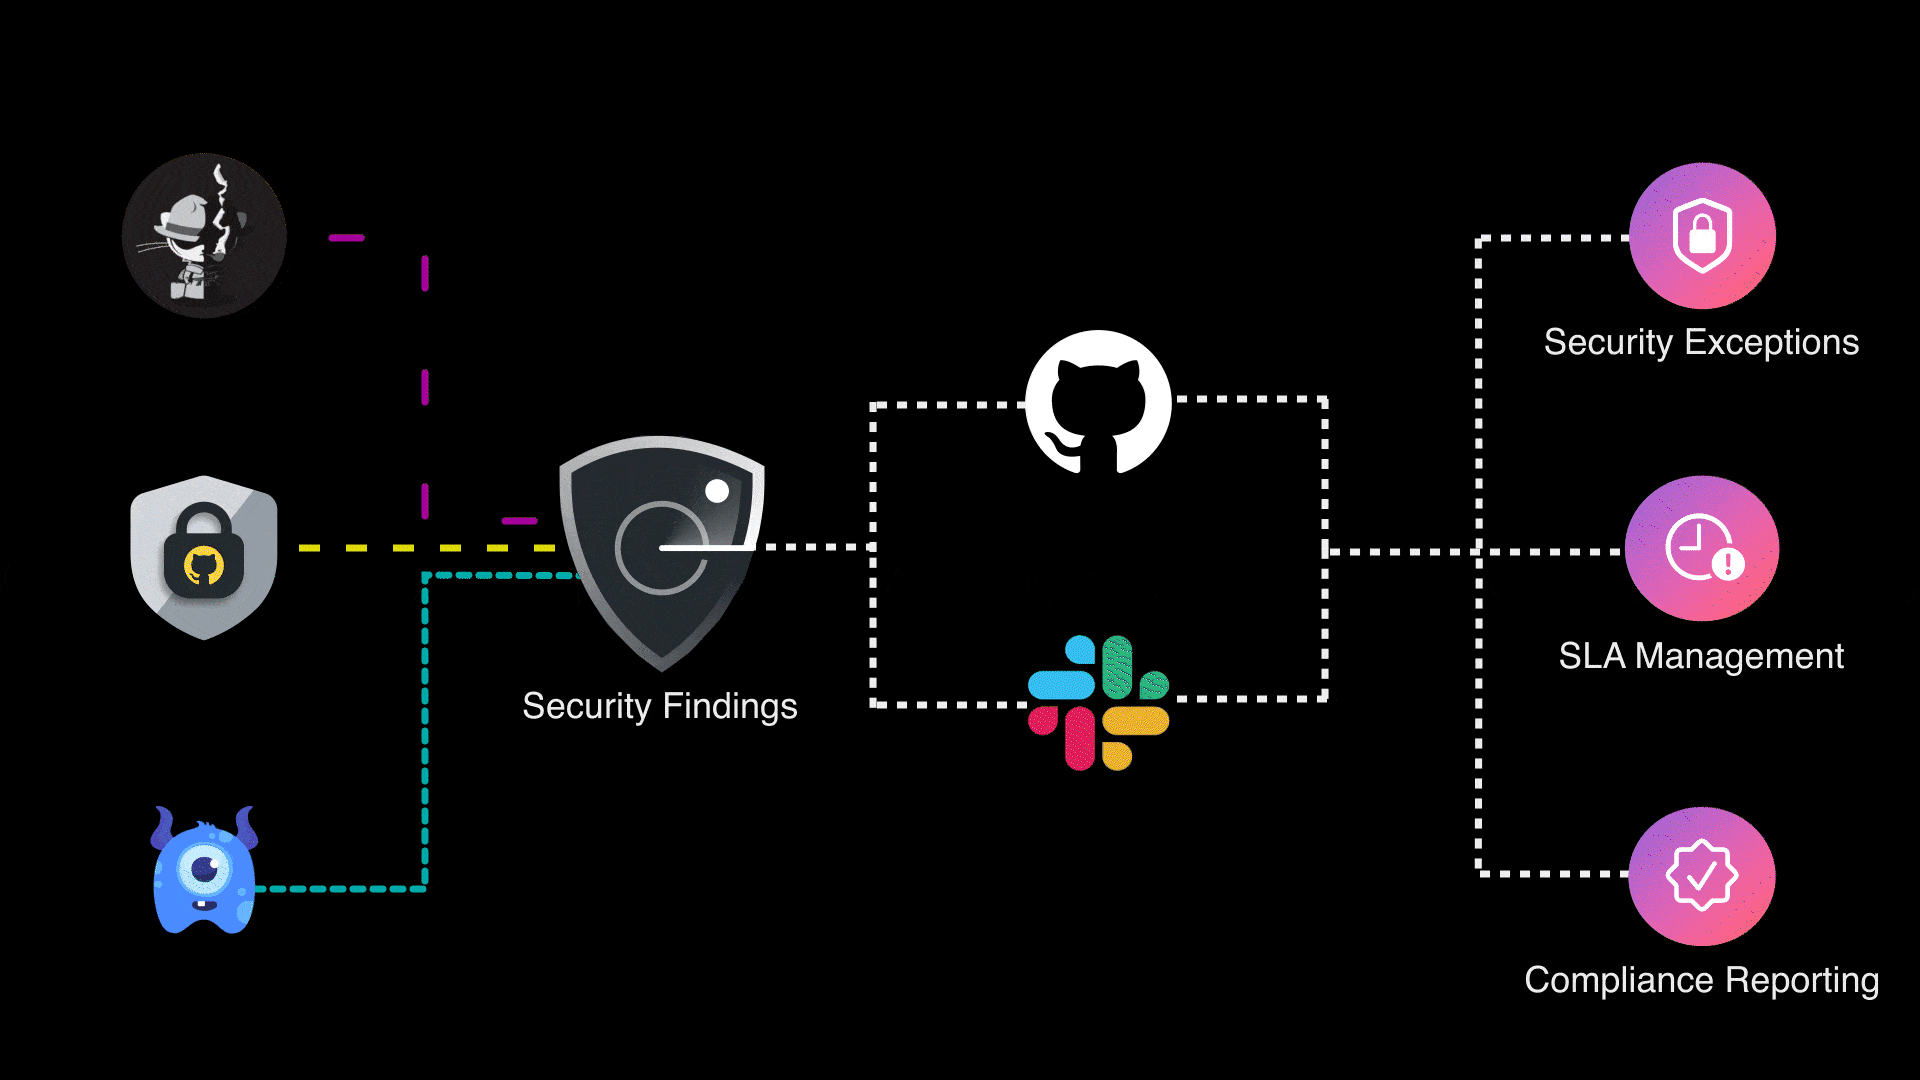 Bug bounty, GitHub Advanced Security, and Grype findings are seamlessly ingested and standardized, ensuring a smooth flow through every stage of the security findings lifecycle.